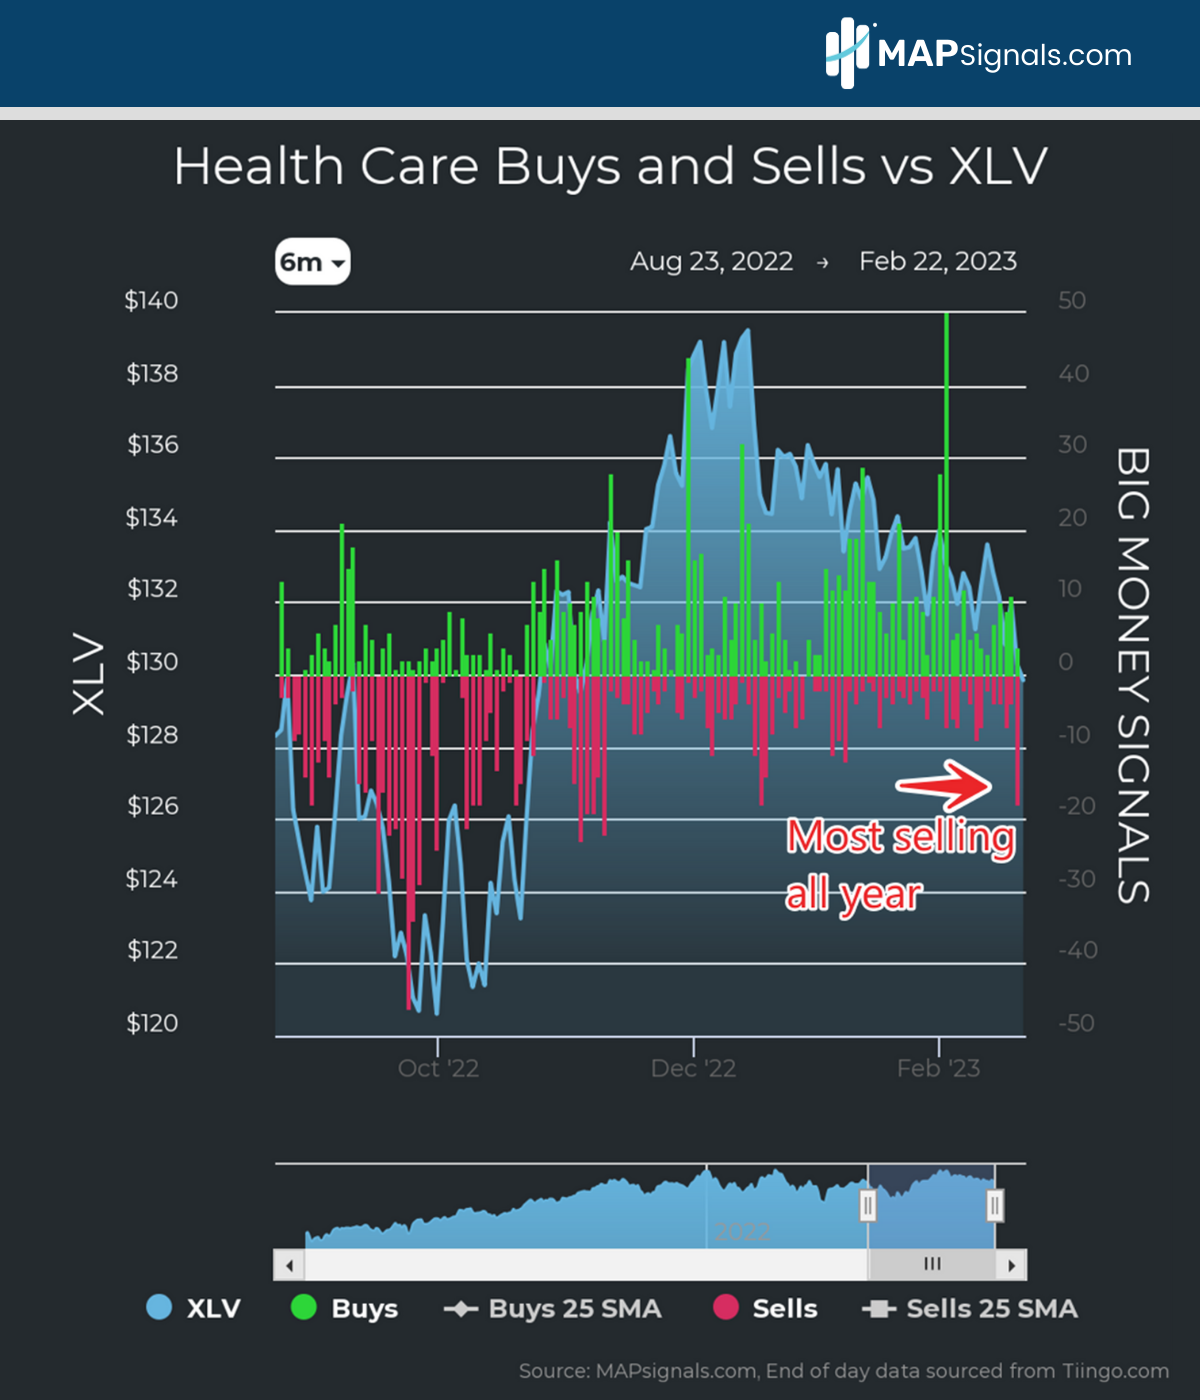 Most Selling all year in Health Care XLV | Big Money Signals